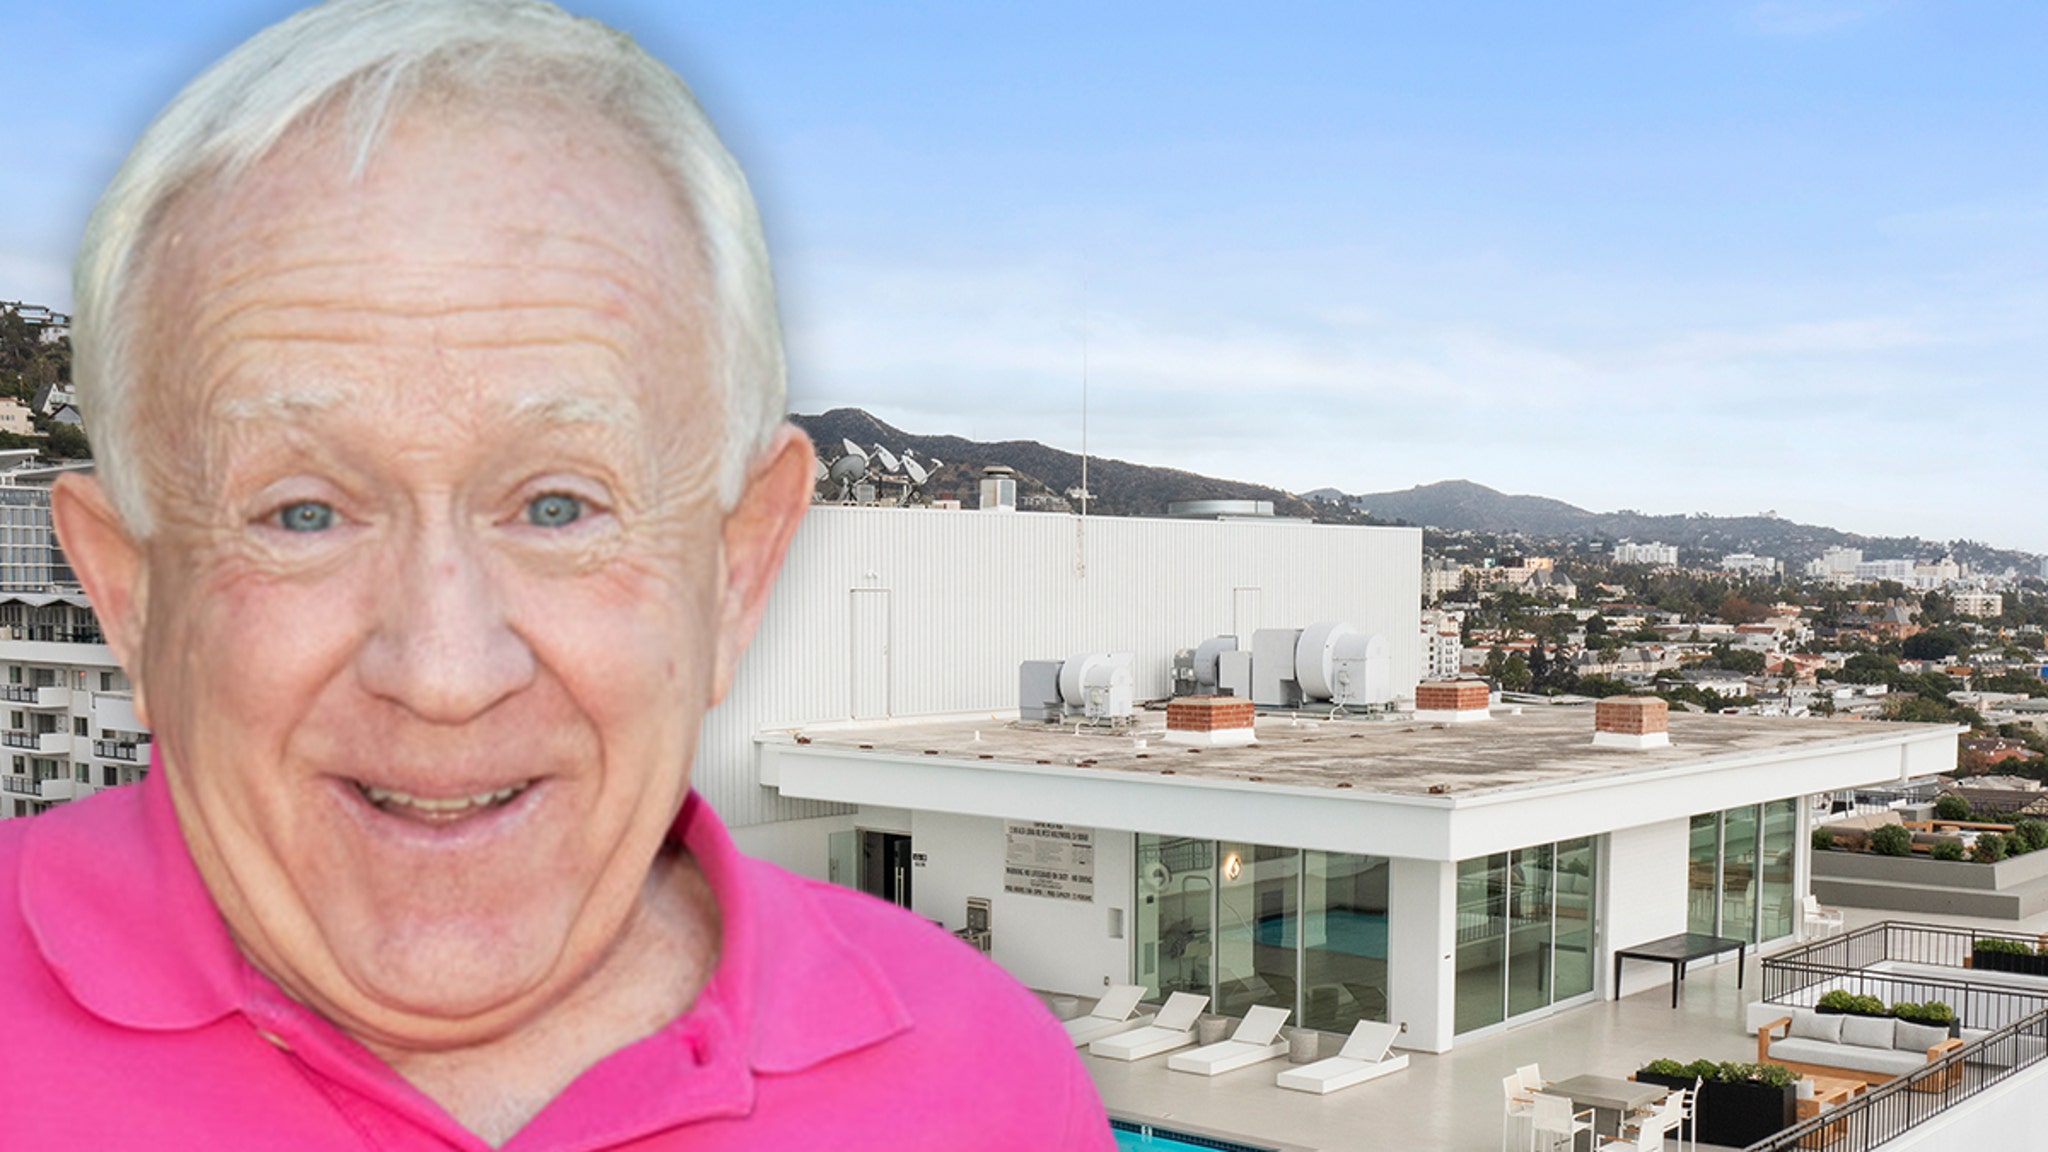 Leslie Jordan Fans Looking to Purchase Condo He Bought Before Death